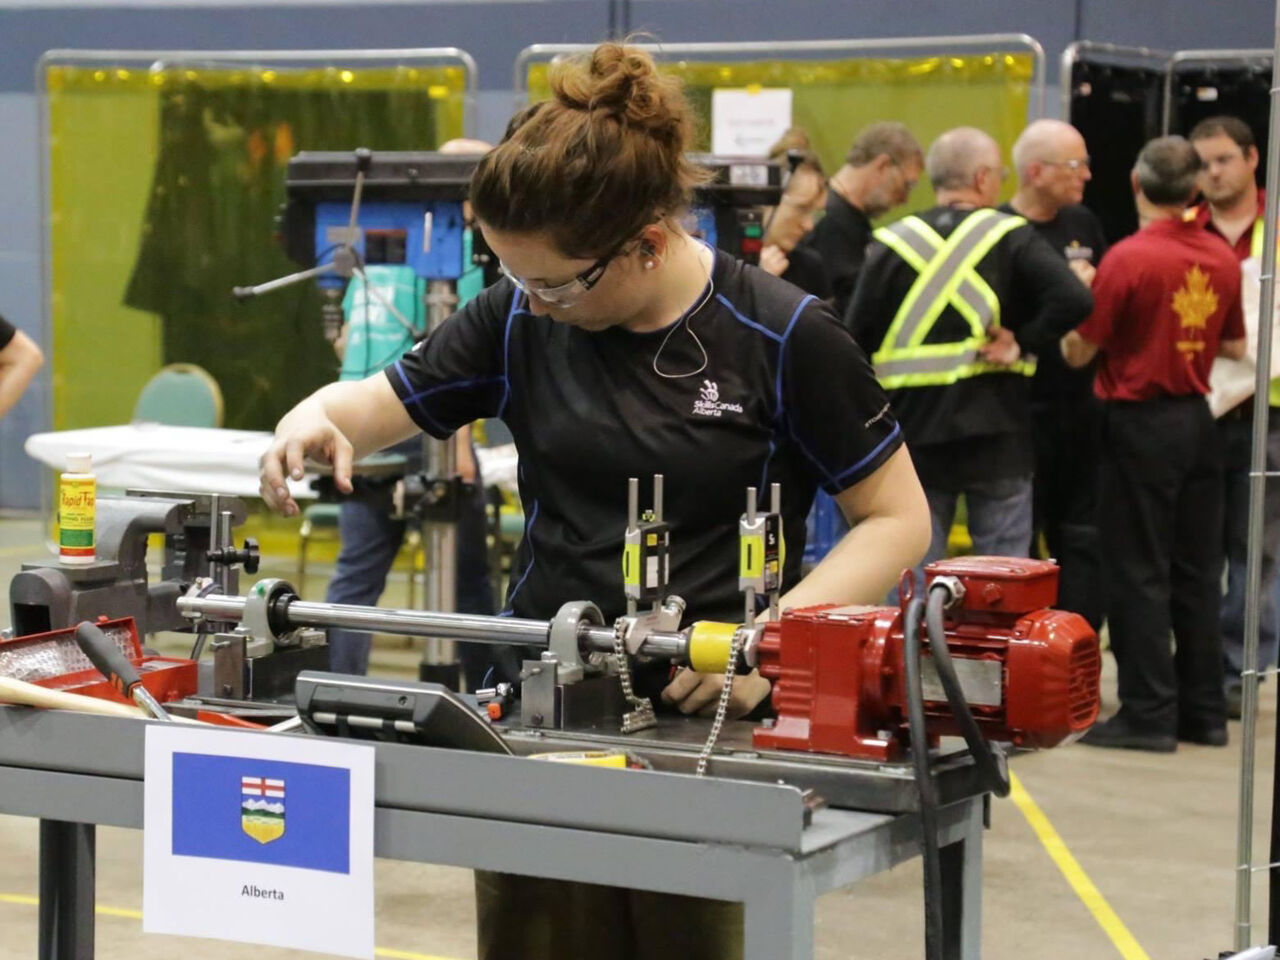 Deanna Reynolds competing for Alberta in an Industrial Mechanic Millwrights skills competition.